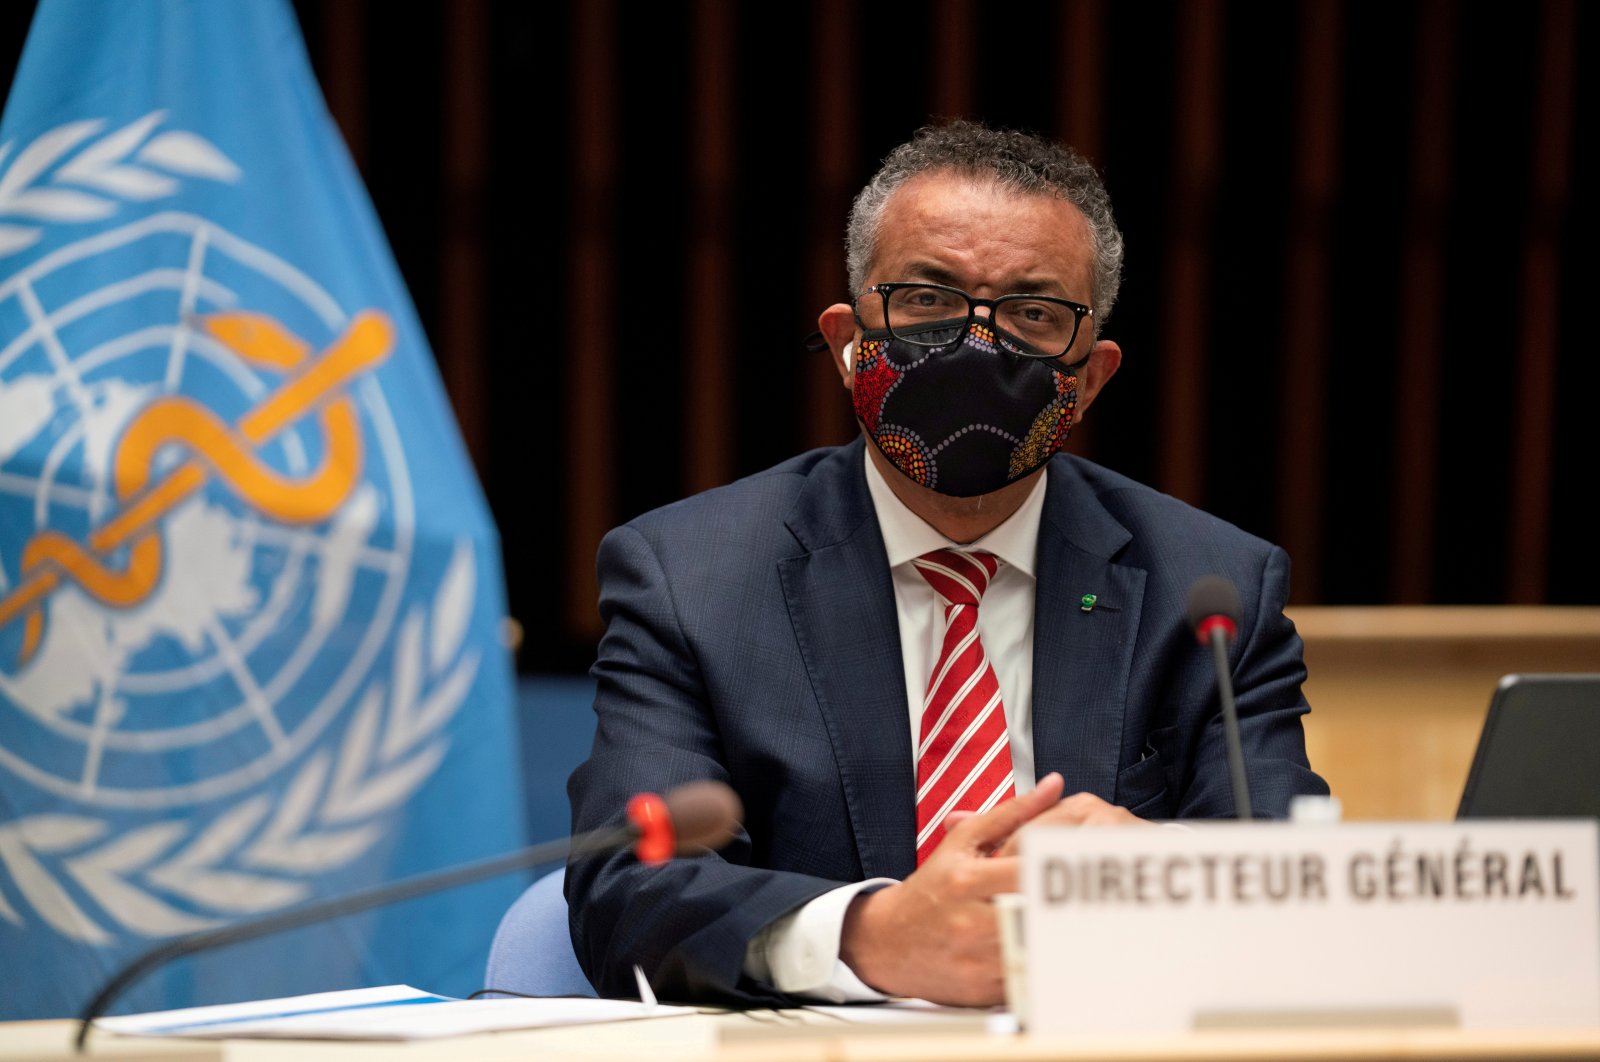 Tedros Adhanom Ghebreyesus, director-general of the World Health Organization (WHO) attends a session of the WHO Executive Board on the coronavirus response, in Geneva, Switzerland, Oct. 5, 2020. (Christopher Black/WHO/Handout via Reuters)